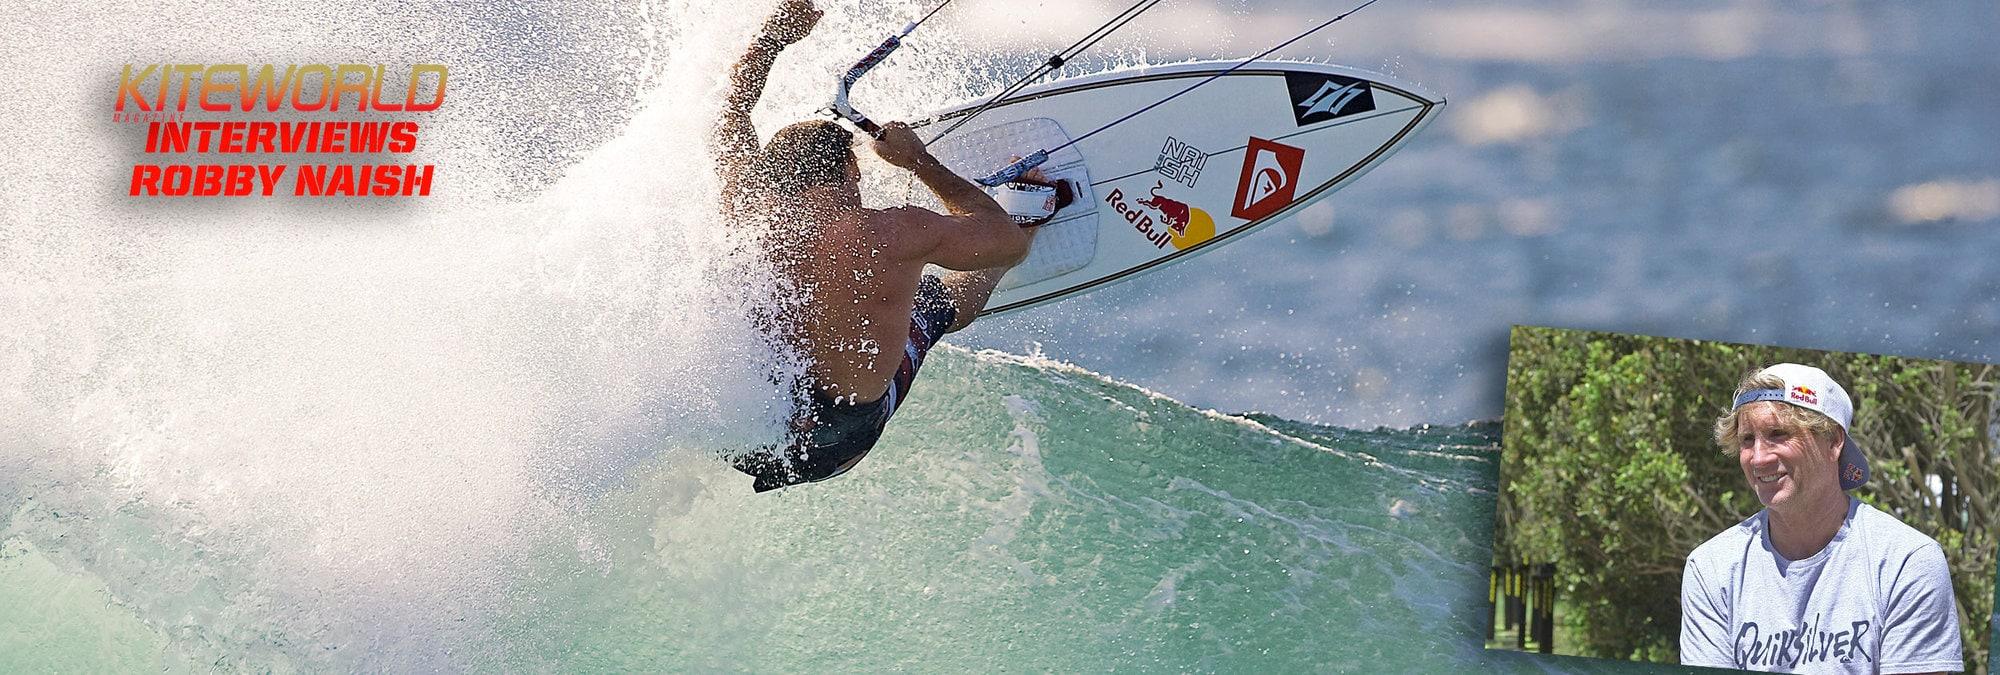 Wind & Water: A Robby Naish Interview, Presented by The Kite Show - Naish.com